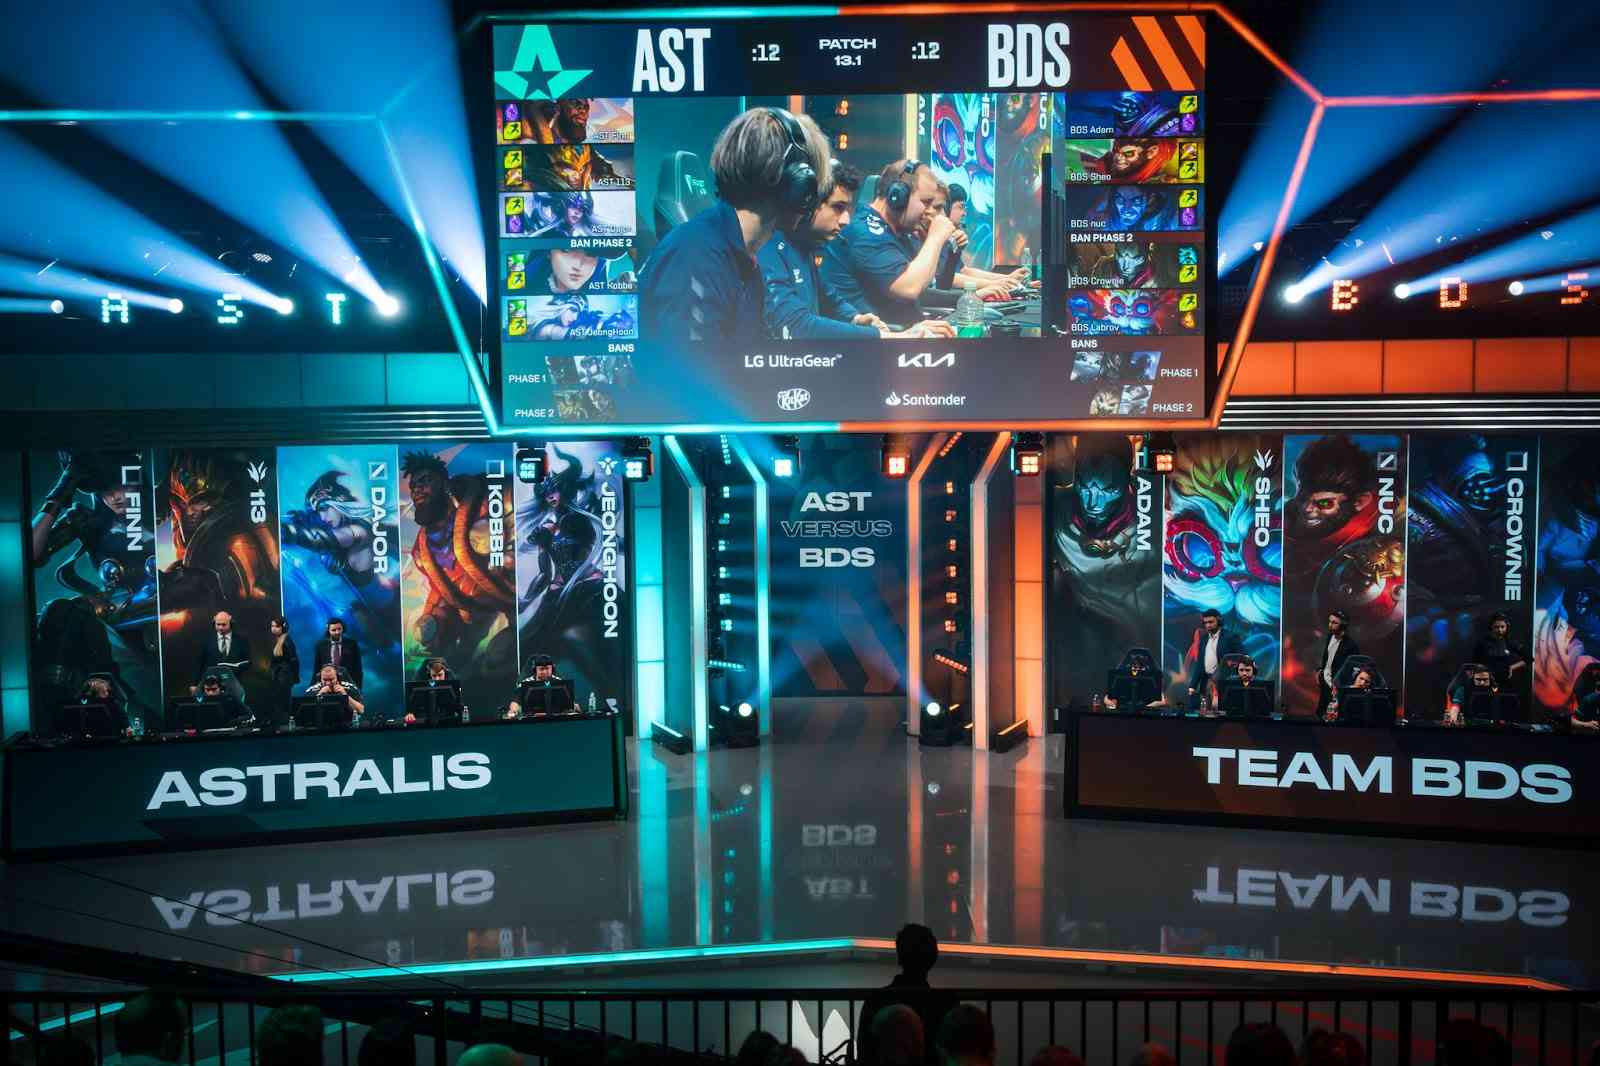 Astralis compete against BDS in the latest season of the LEC.